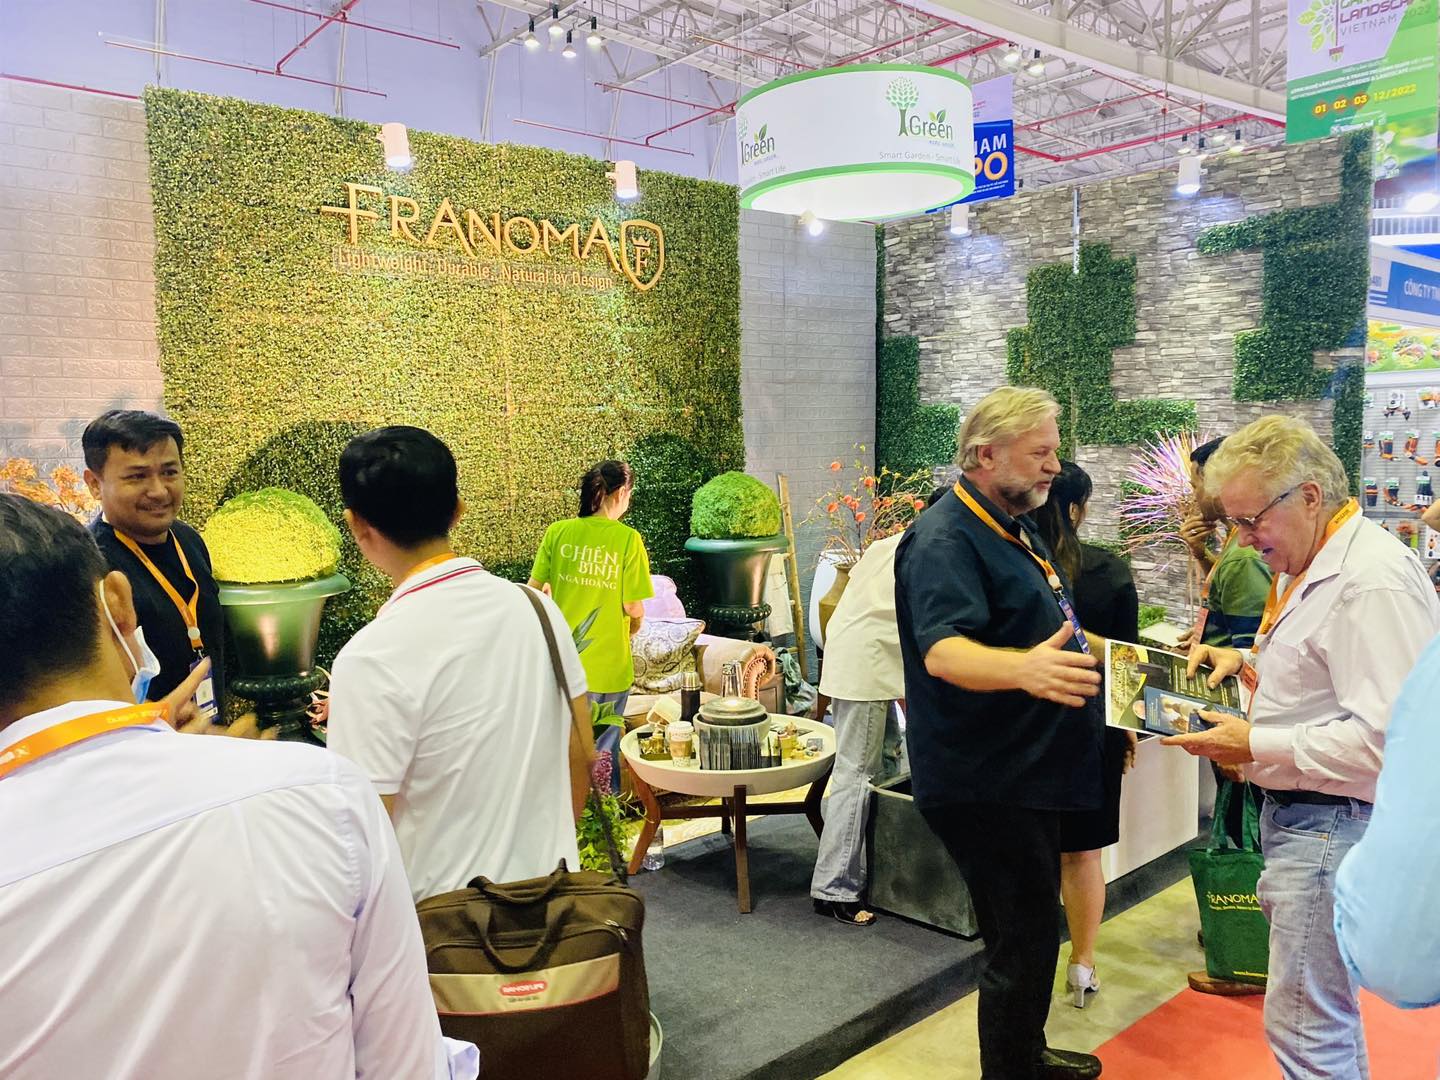 Some outstanding products displayed at the Vietnam Growtech event